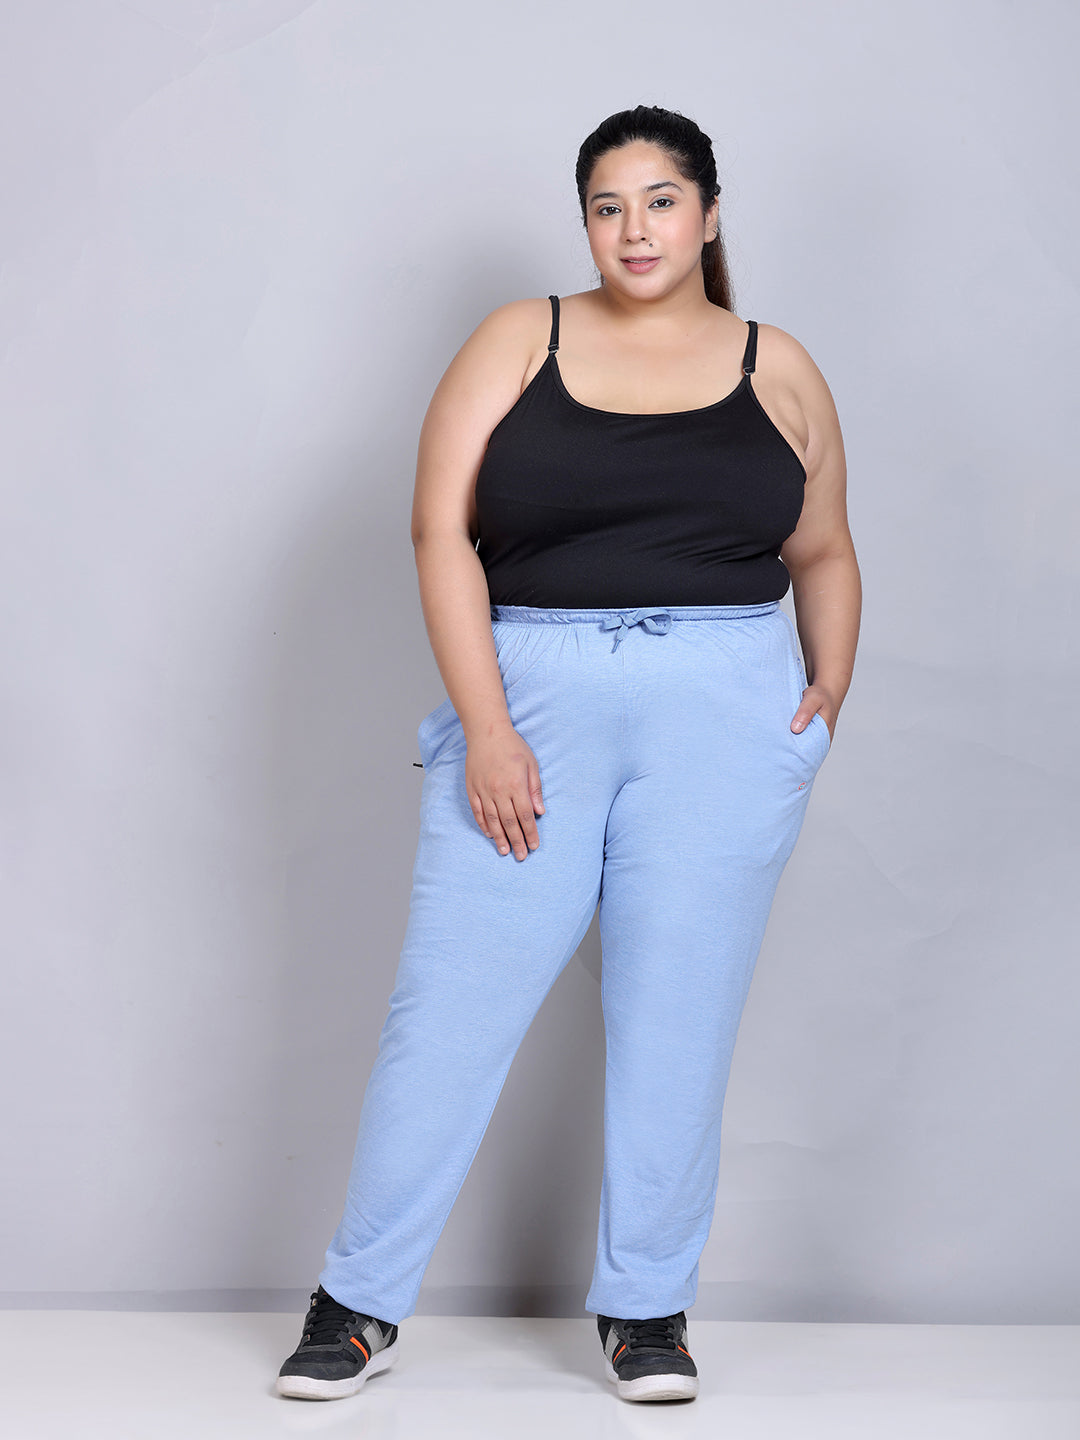 Comfy Sky Blue Cotton Track Pants For Women At Best Prices